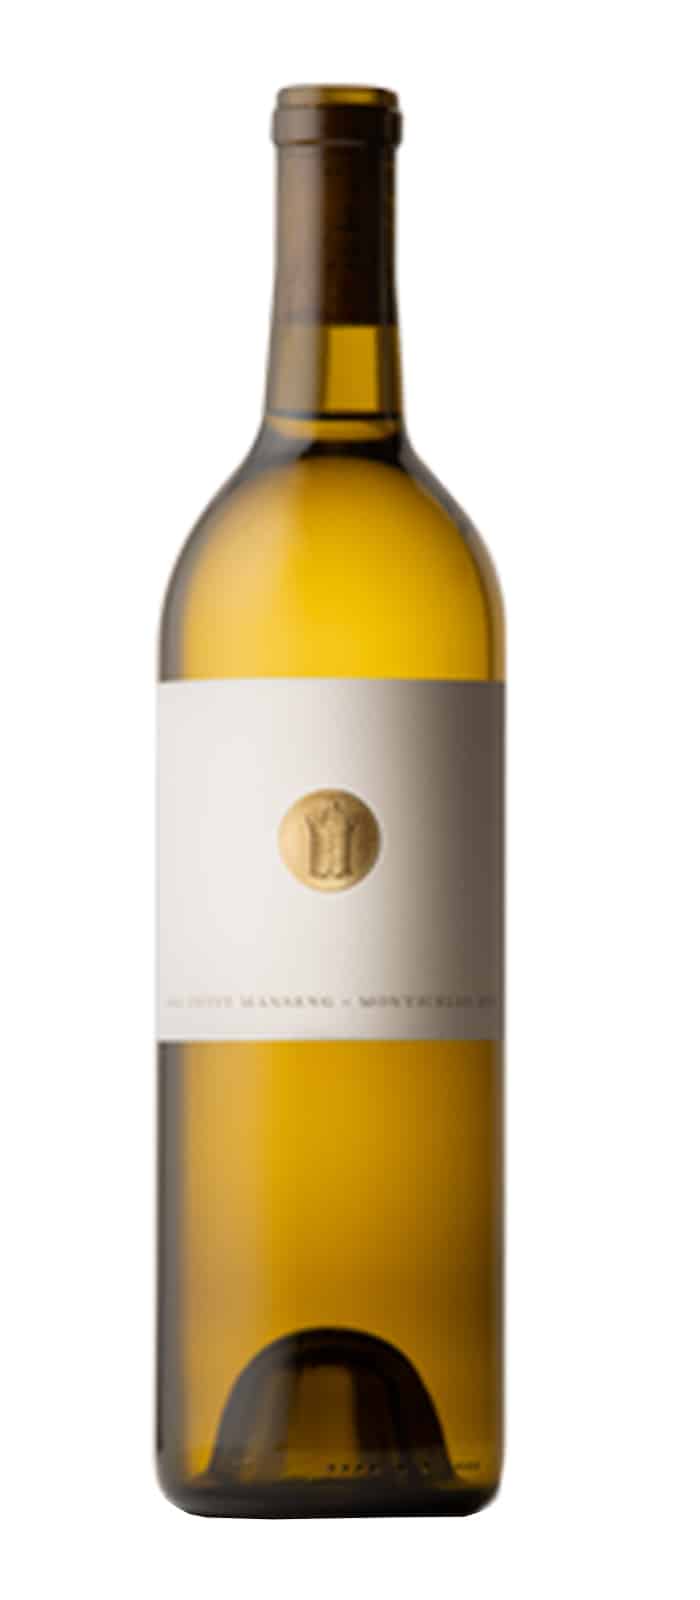 Southwest Mountains Vineyards 2021 Petit Manseng, Gold Medal, Virginia Governor's Cup Wine Competition.